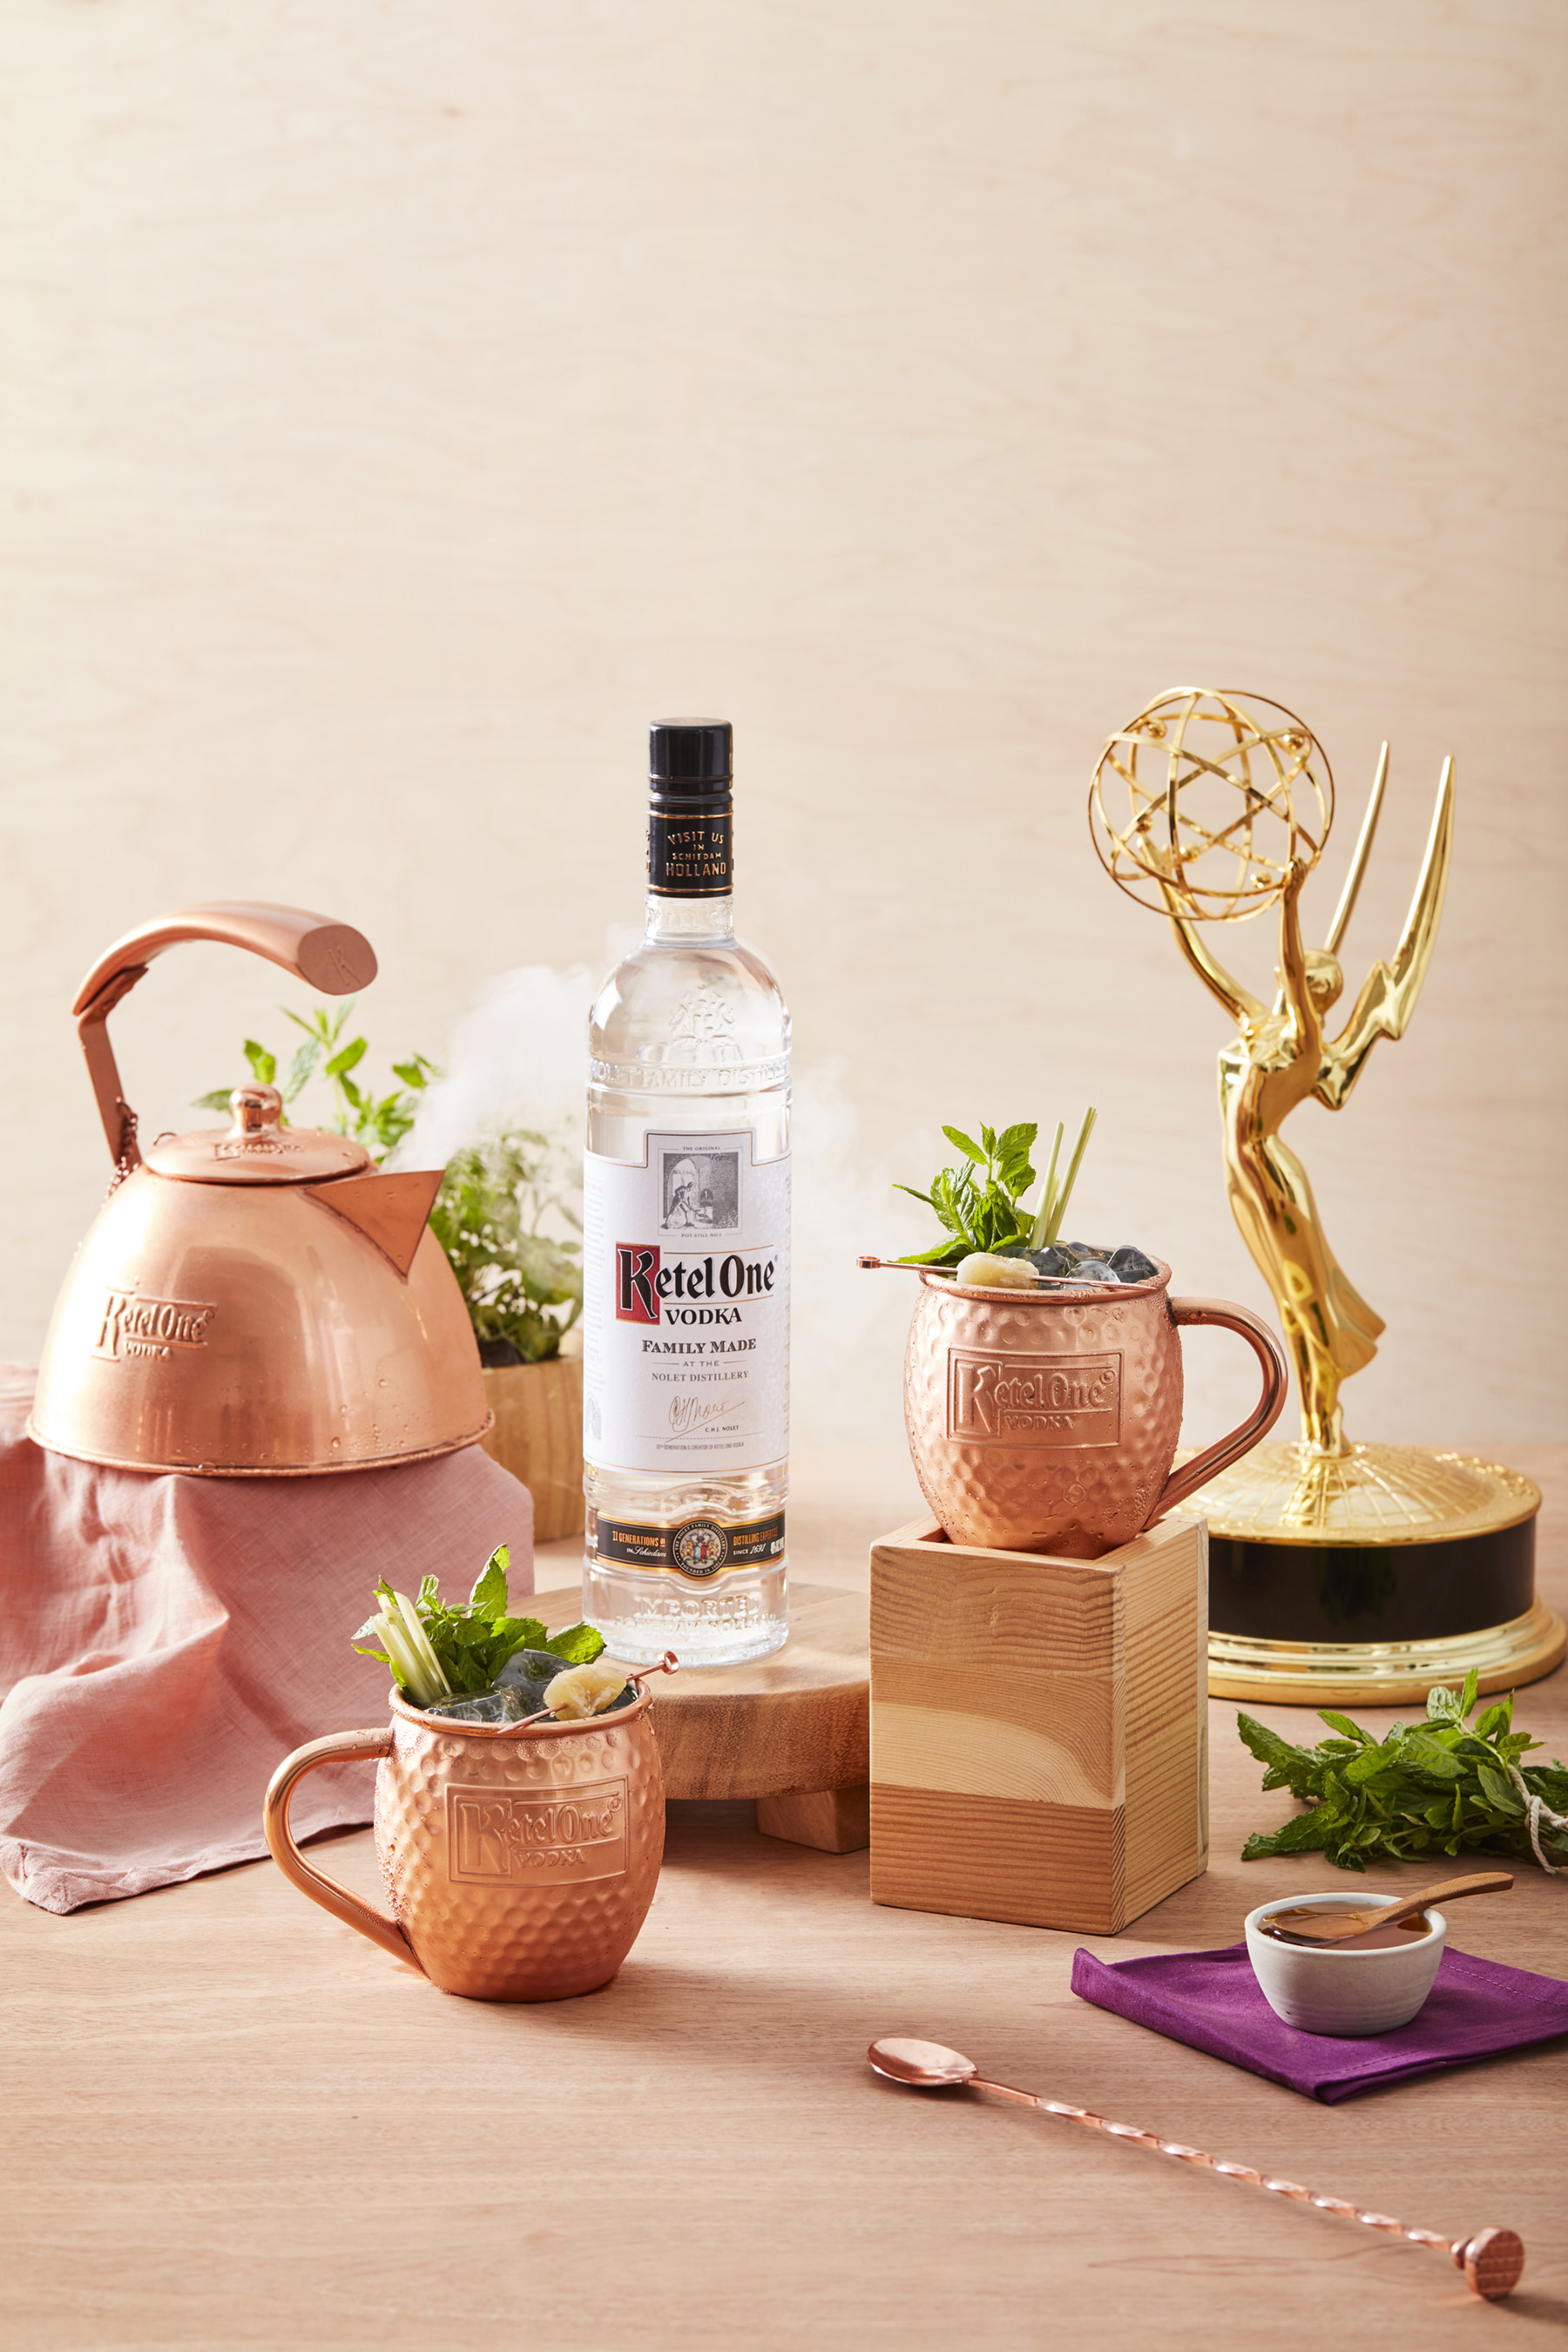 Ketel One Vodka’s The Marvelous Mule is an unexpected global twist to the classic ginger mule – incorporating both turmeric and lemongrass